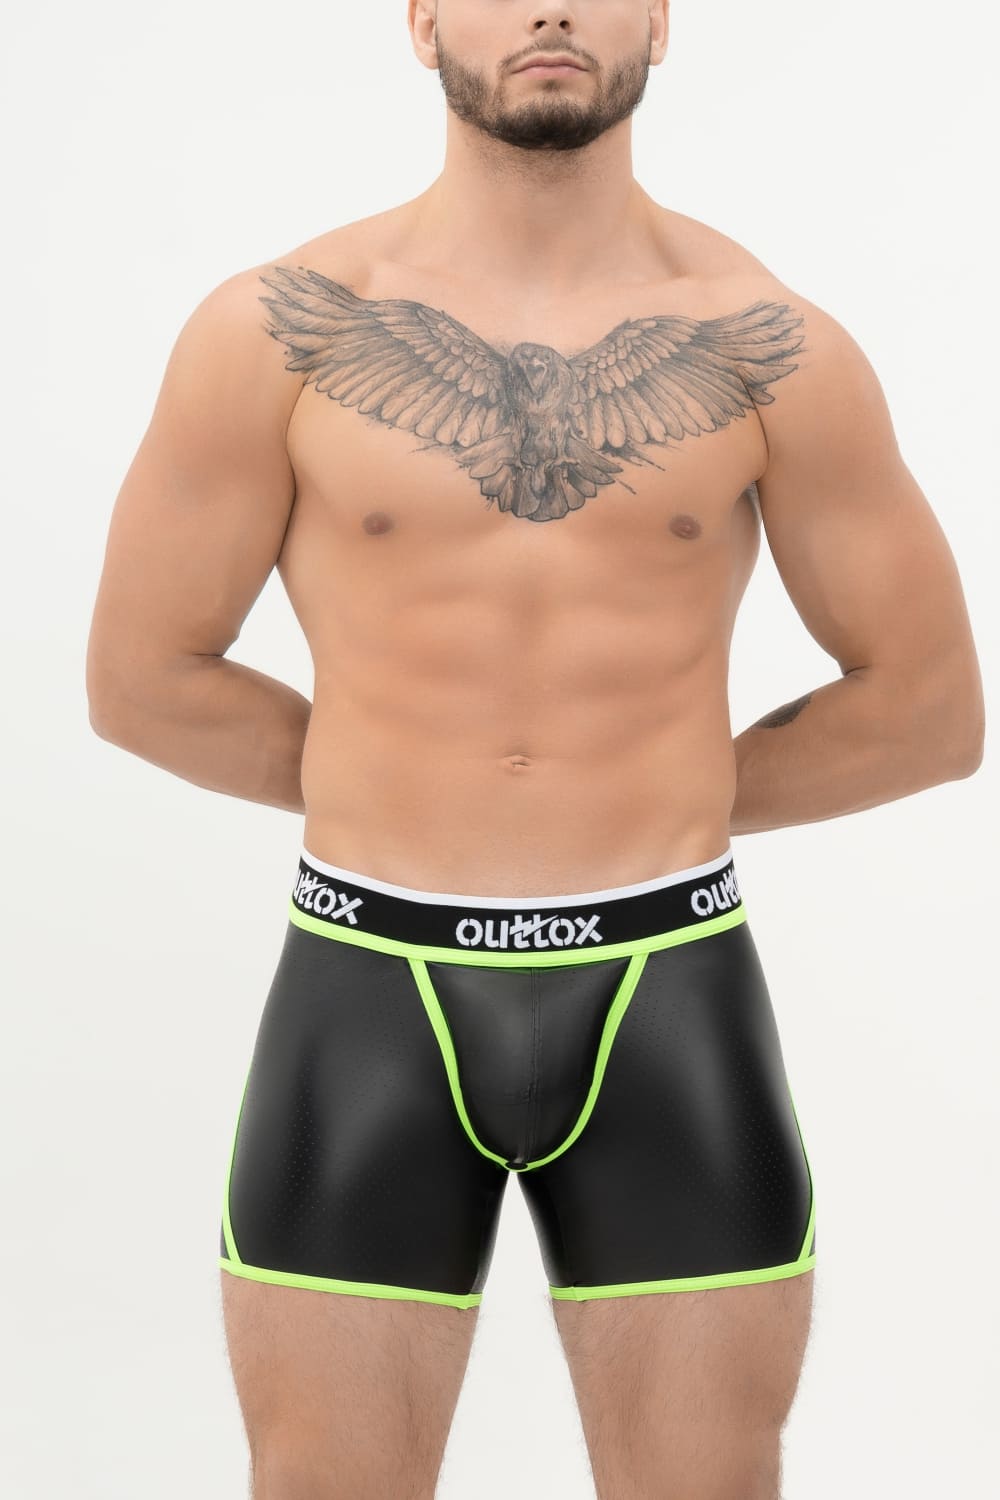 Outtox. Open Rear Shorts with Snap Codpiece. Black+Green &